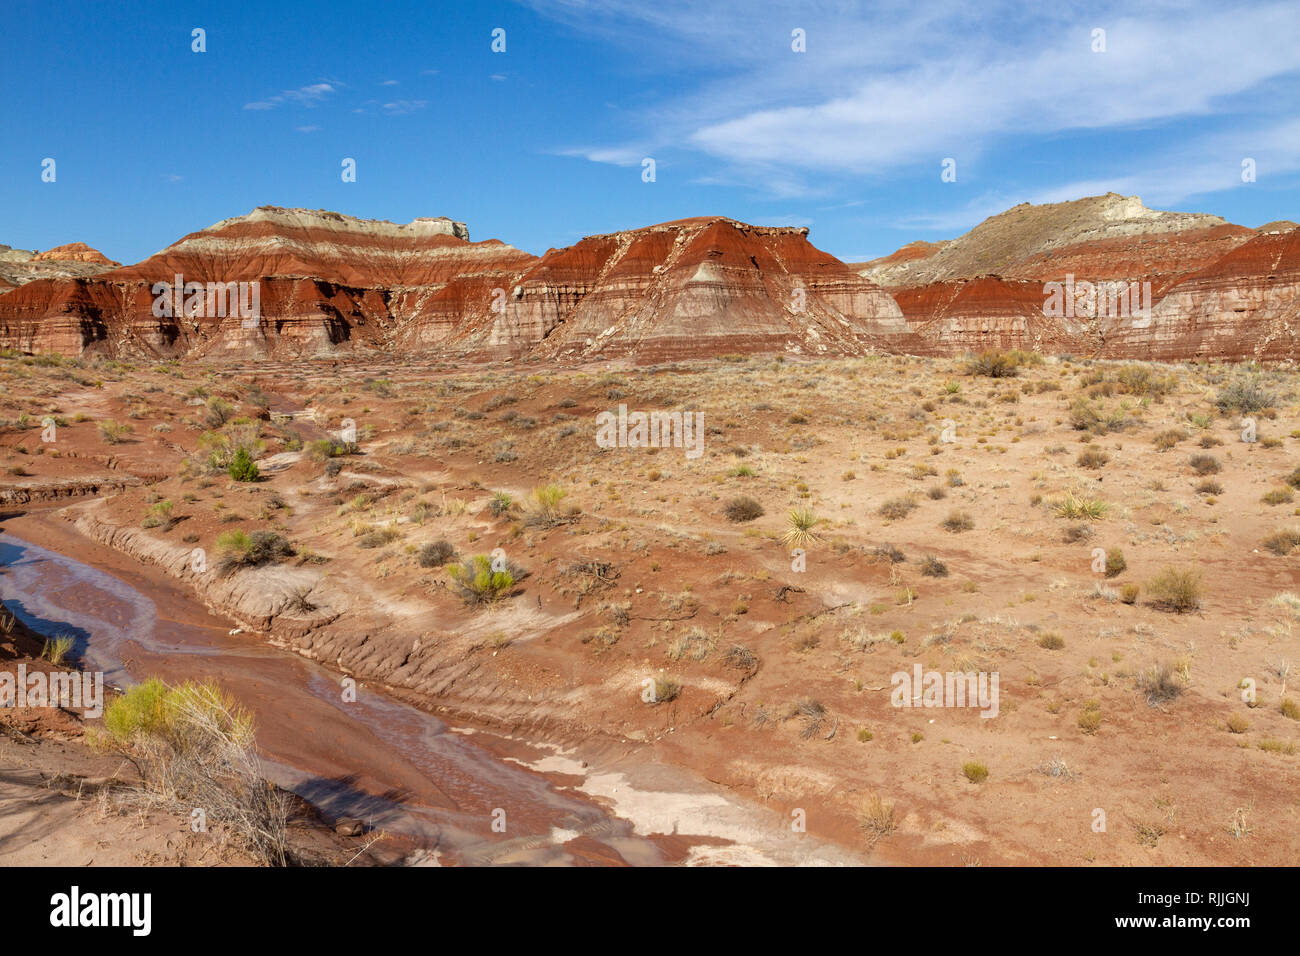 General view of the Toadstool Hoodoos area, an area of toadstool shaped balanced rocks in the Grand Staircase-Escalante National Monument, UT, USA. Stock Photo